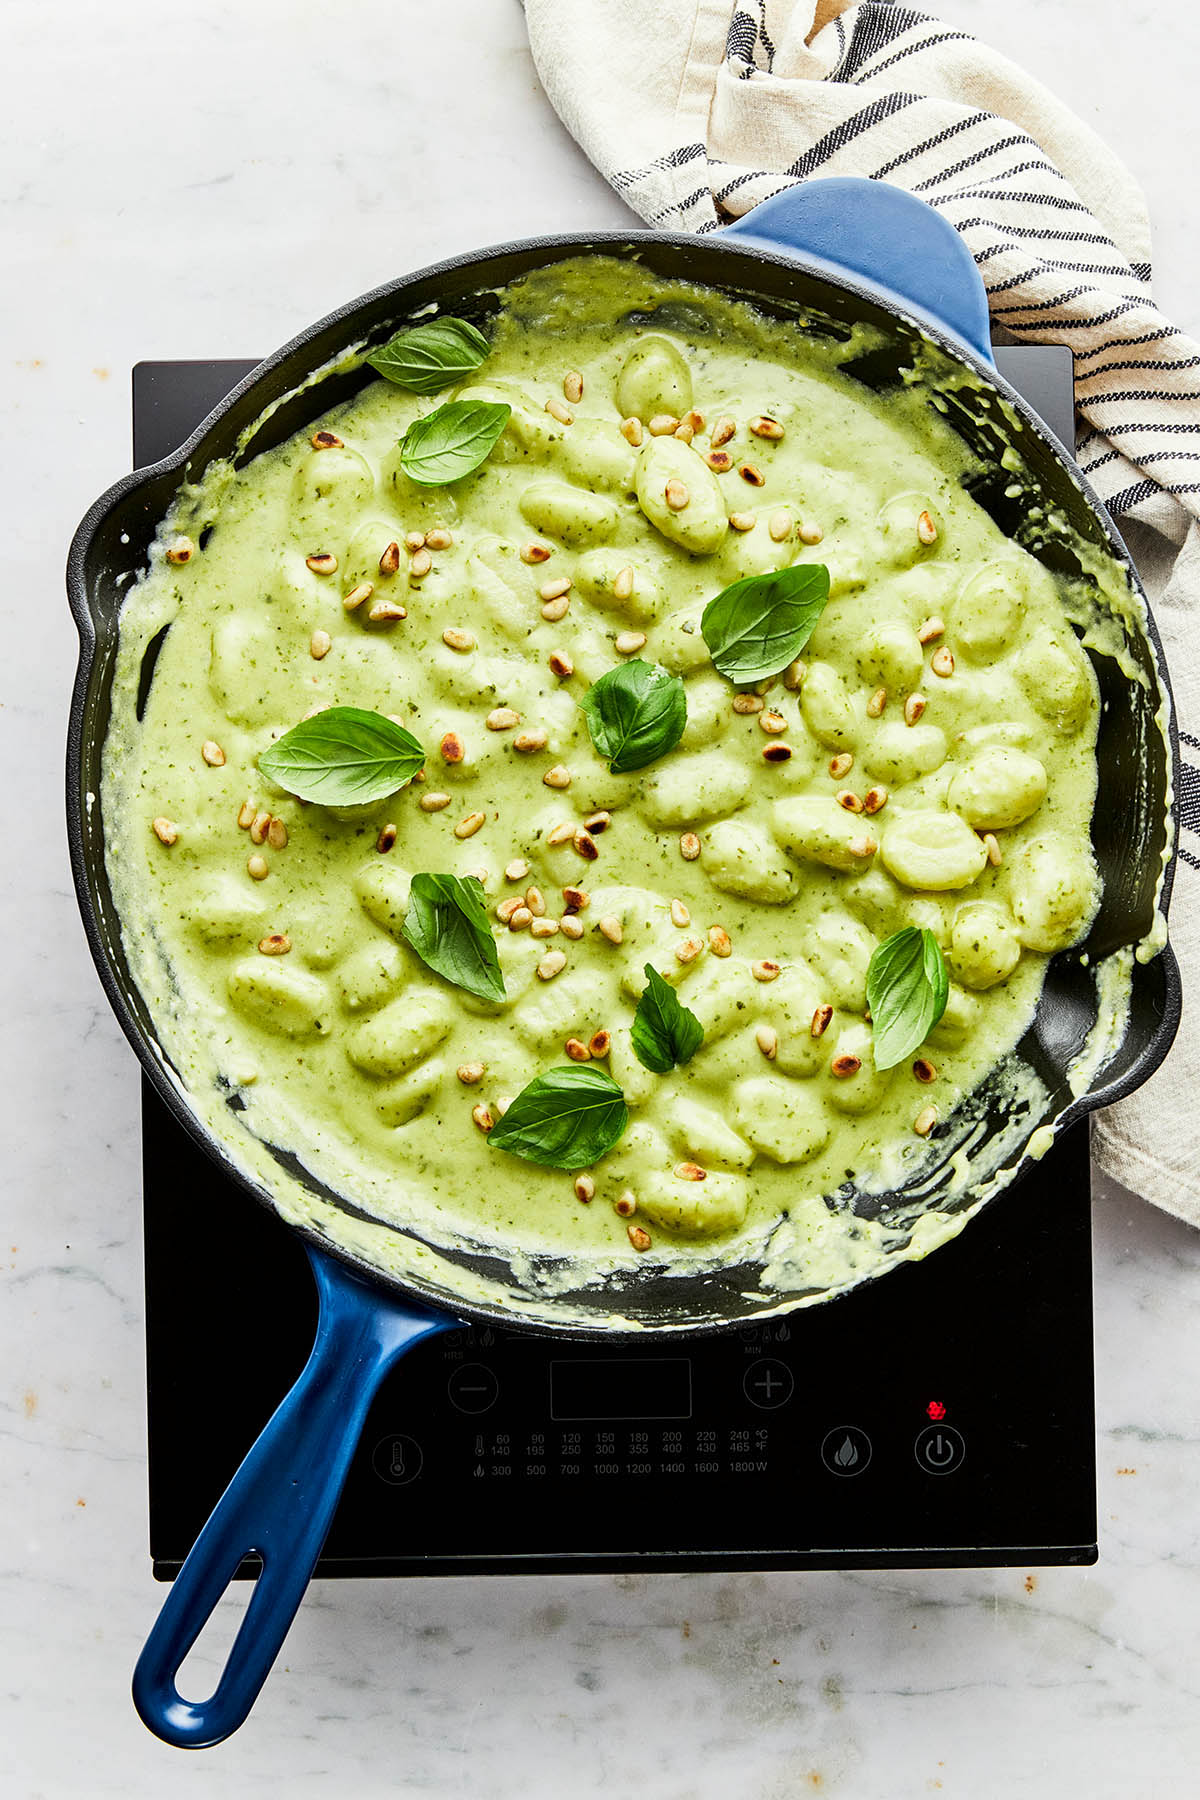 A pan of gnocchi pesto topped with toasted pine nuts and fresh basil leaves.